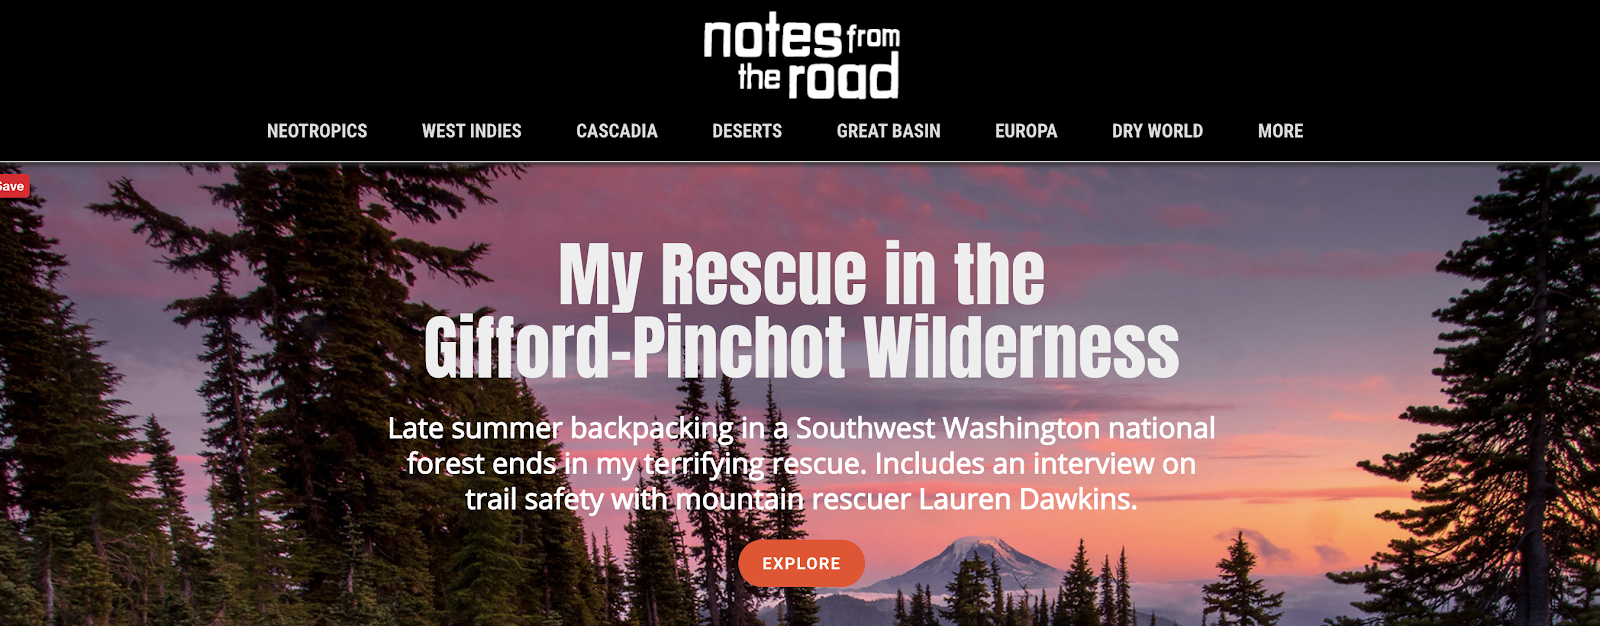 Notes From the Road Blog in the Travel and Adventure Niche